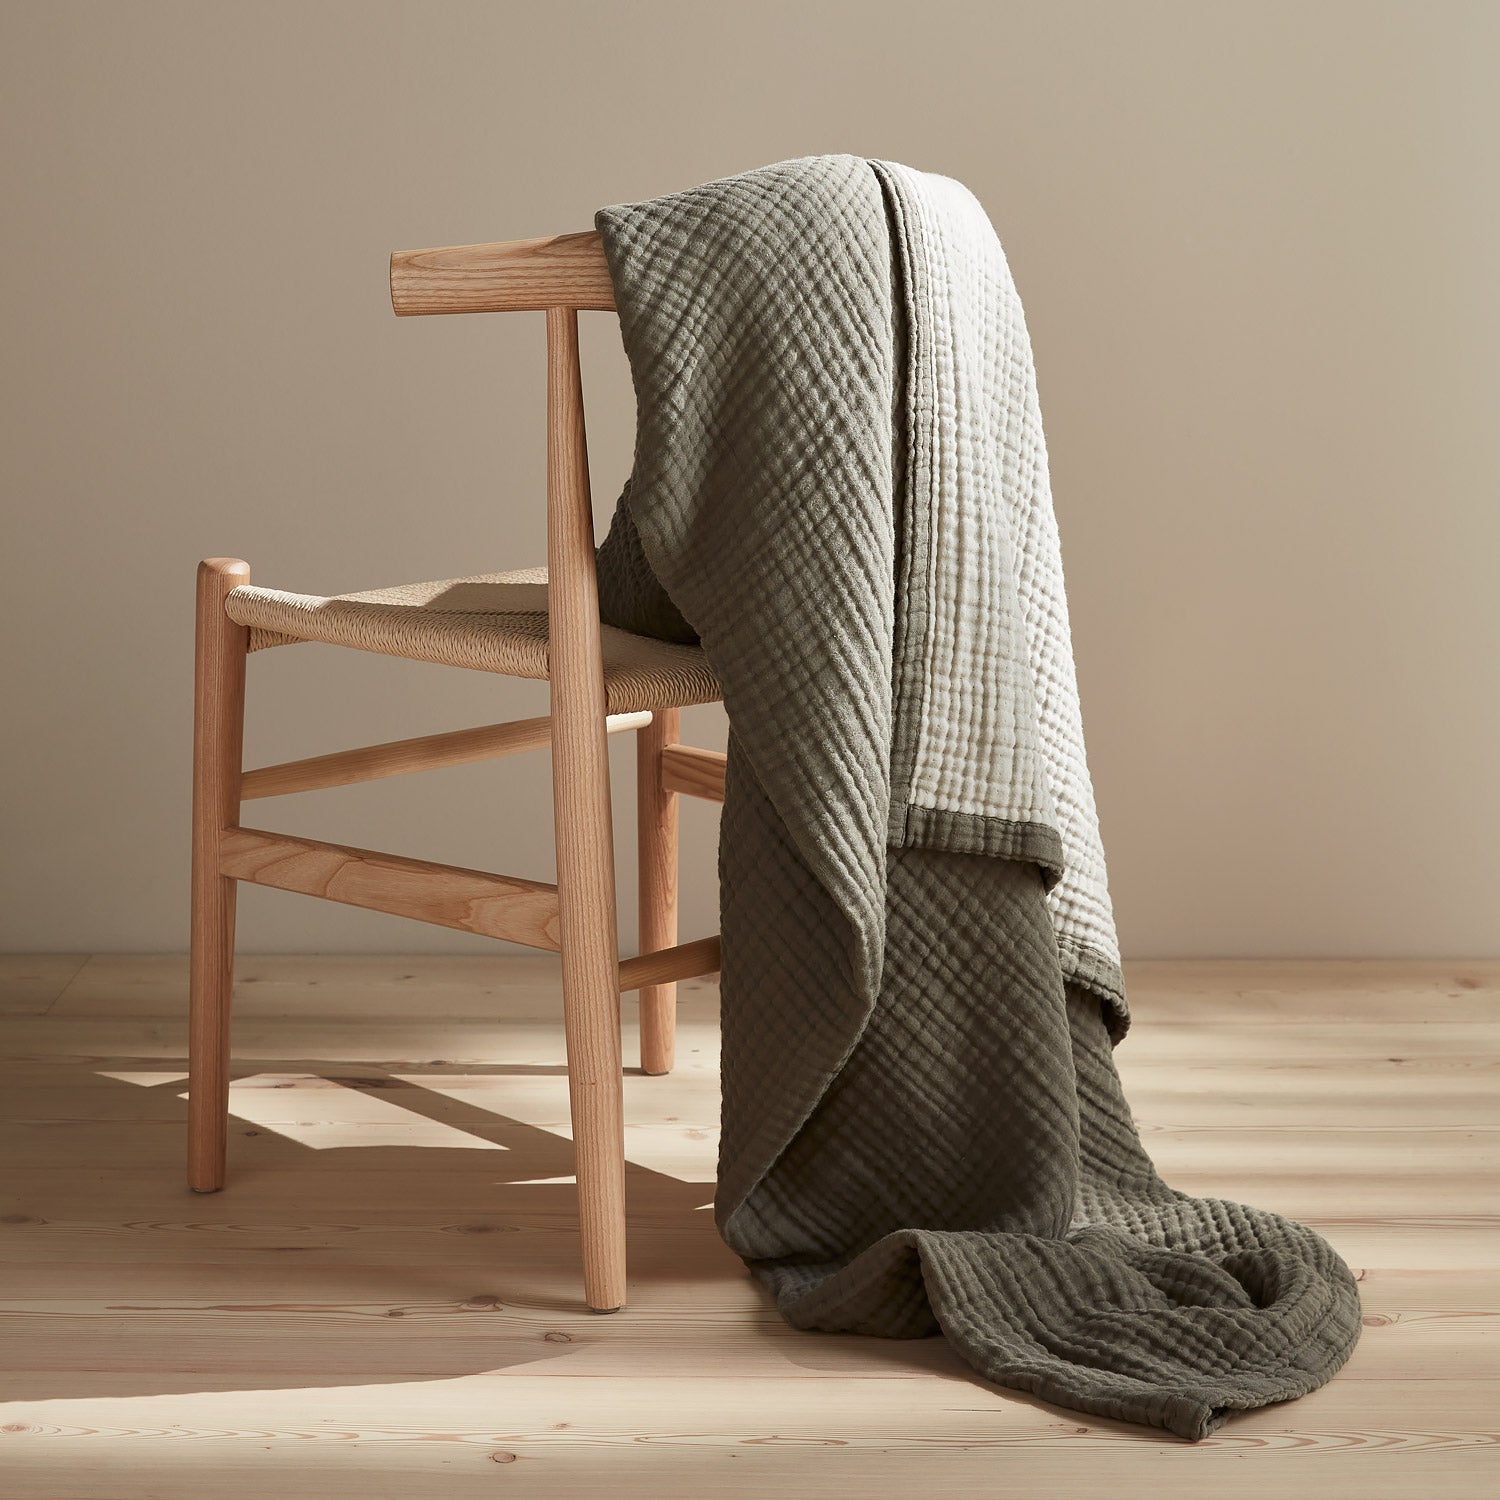 The Reversible Dream Cotton Throw - Moss / Clay